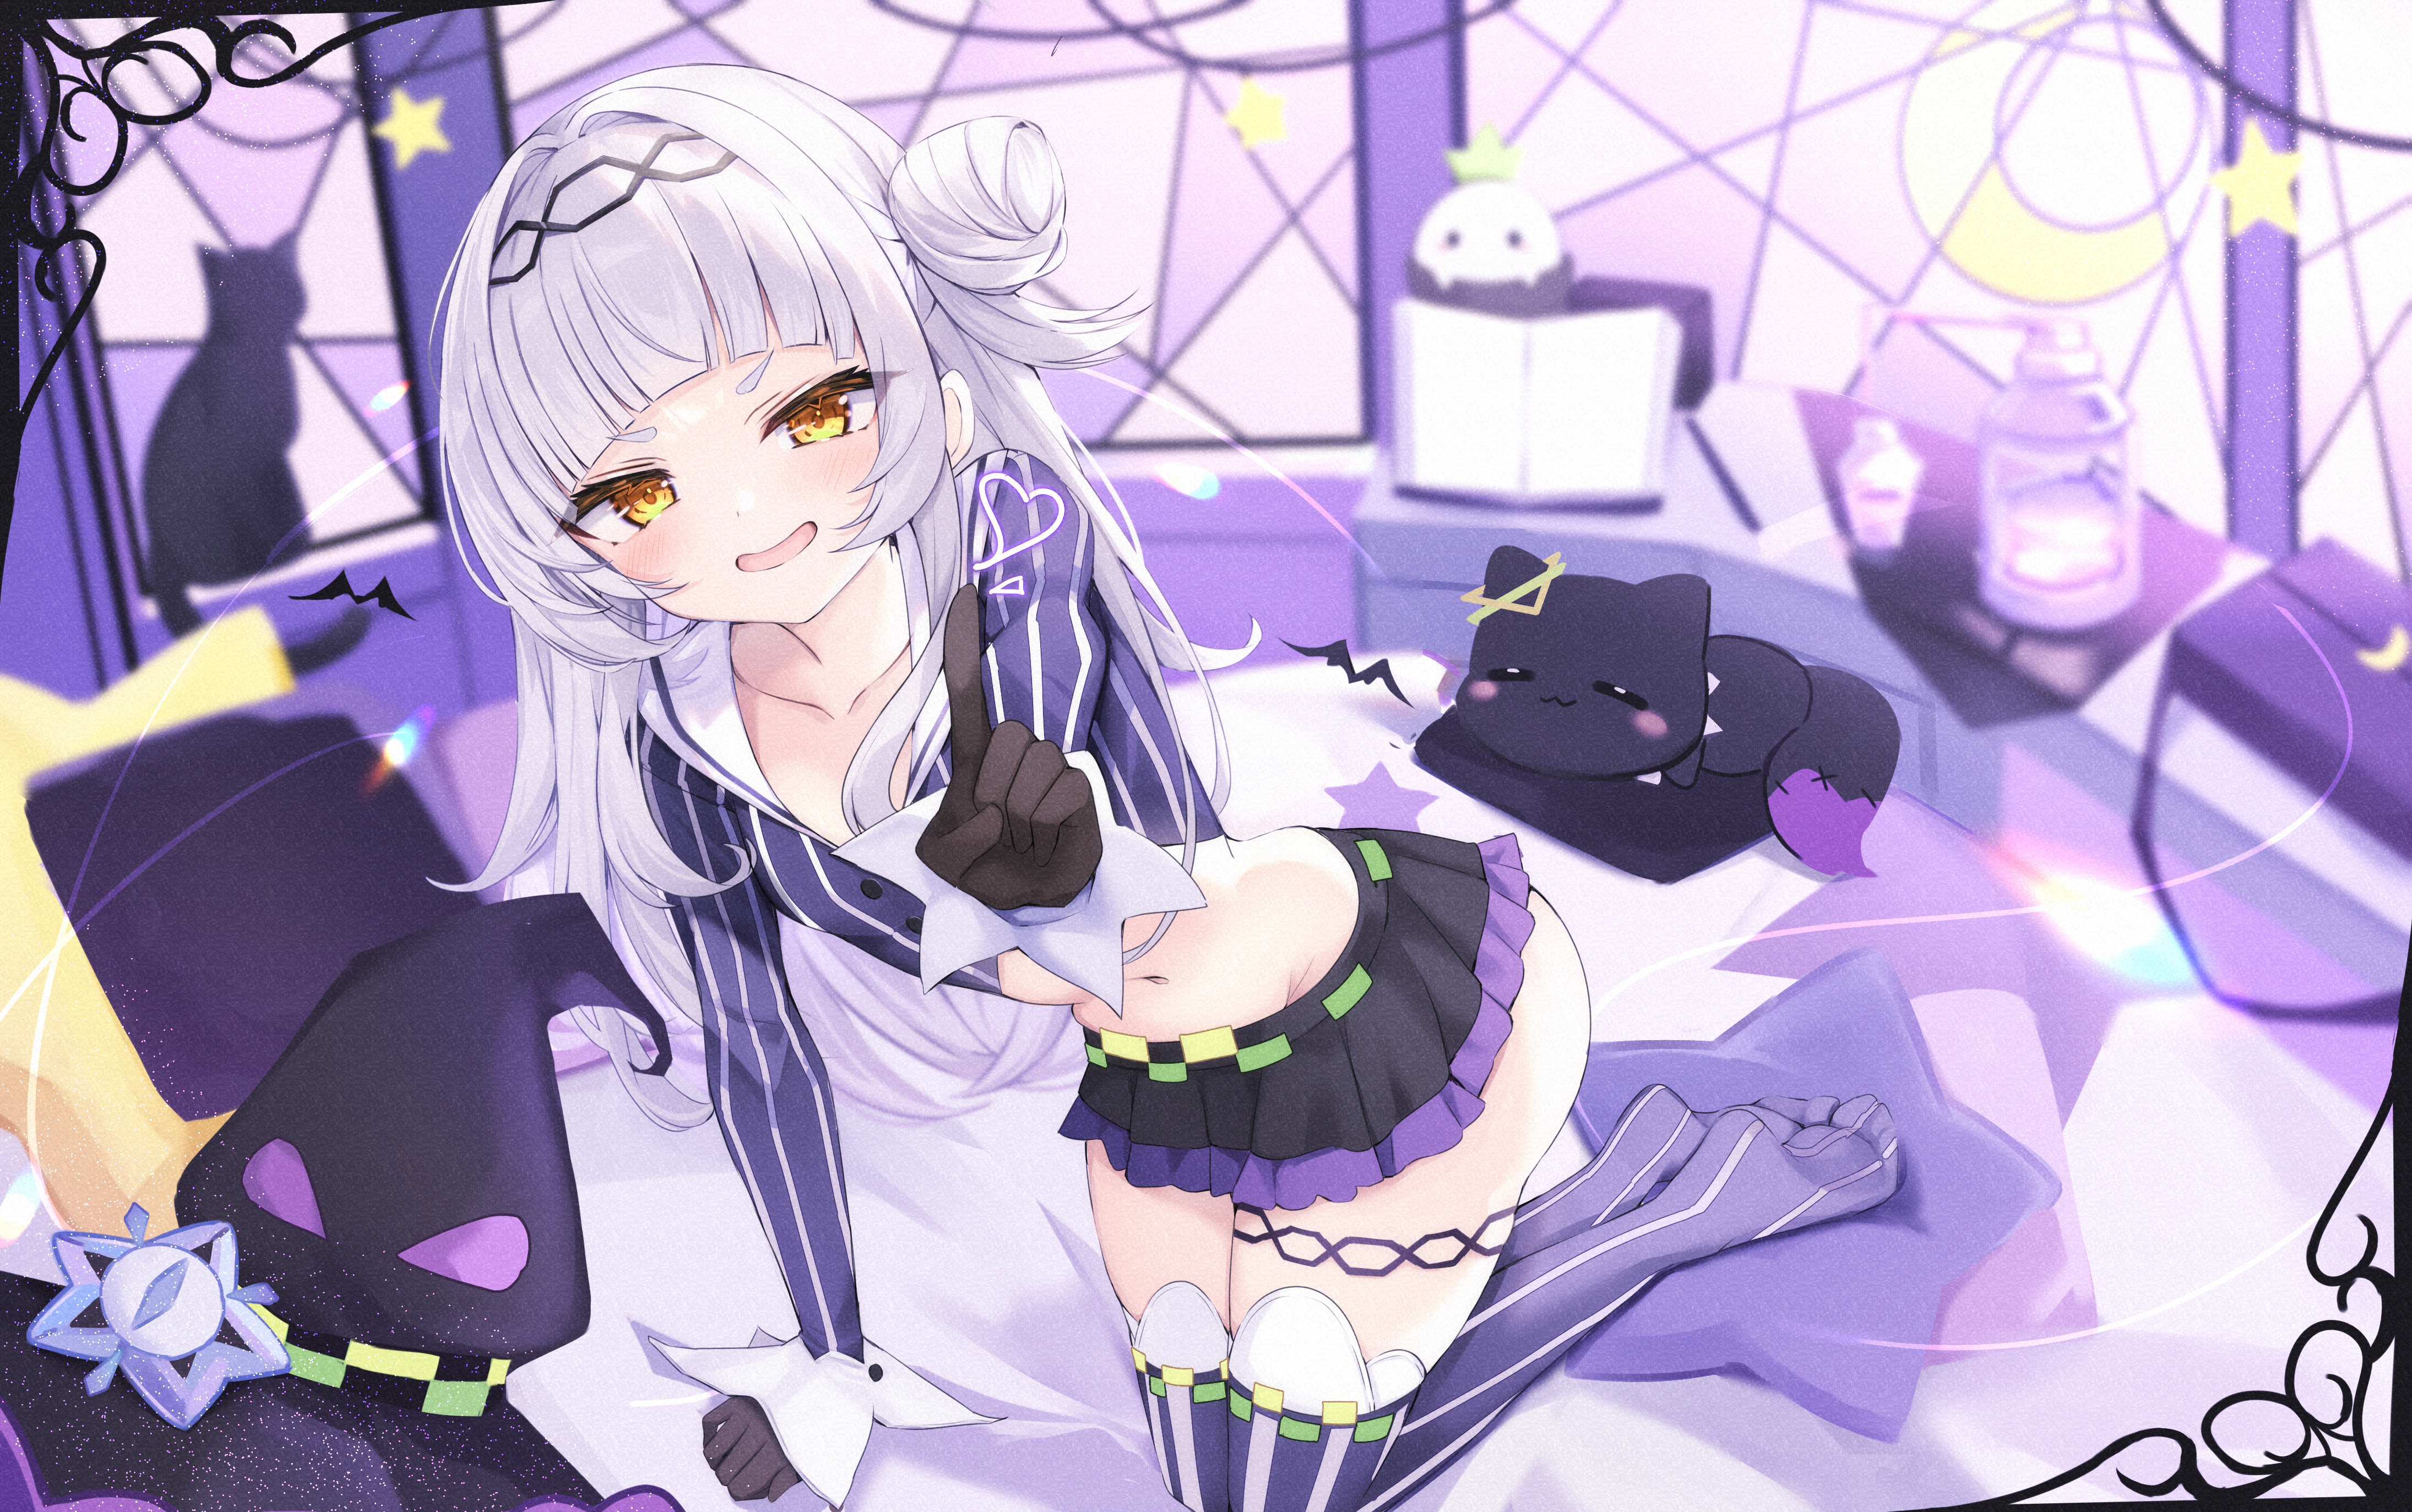 Anime 4380x2746 anime anime girls Murasaki Shion Hololive Virtual Youtuber gloves miniskirt thighs belly belly button indoors women indoors looking at viewer blushing white hair yellow eyes smiling open mouth heart cats bed in bed stars Moon witch hat crescent moon long hair hairbun stockings pillow bedroom animals